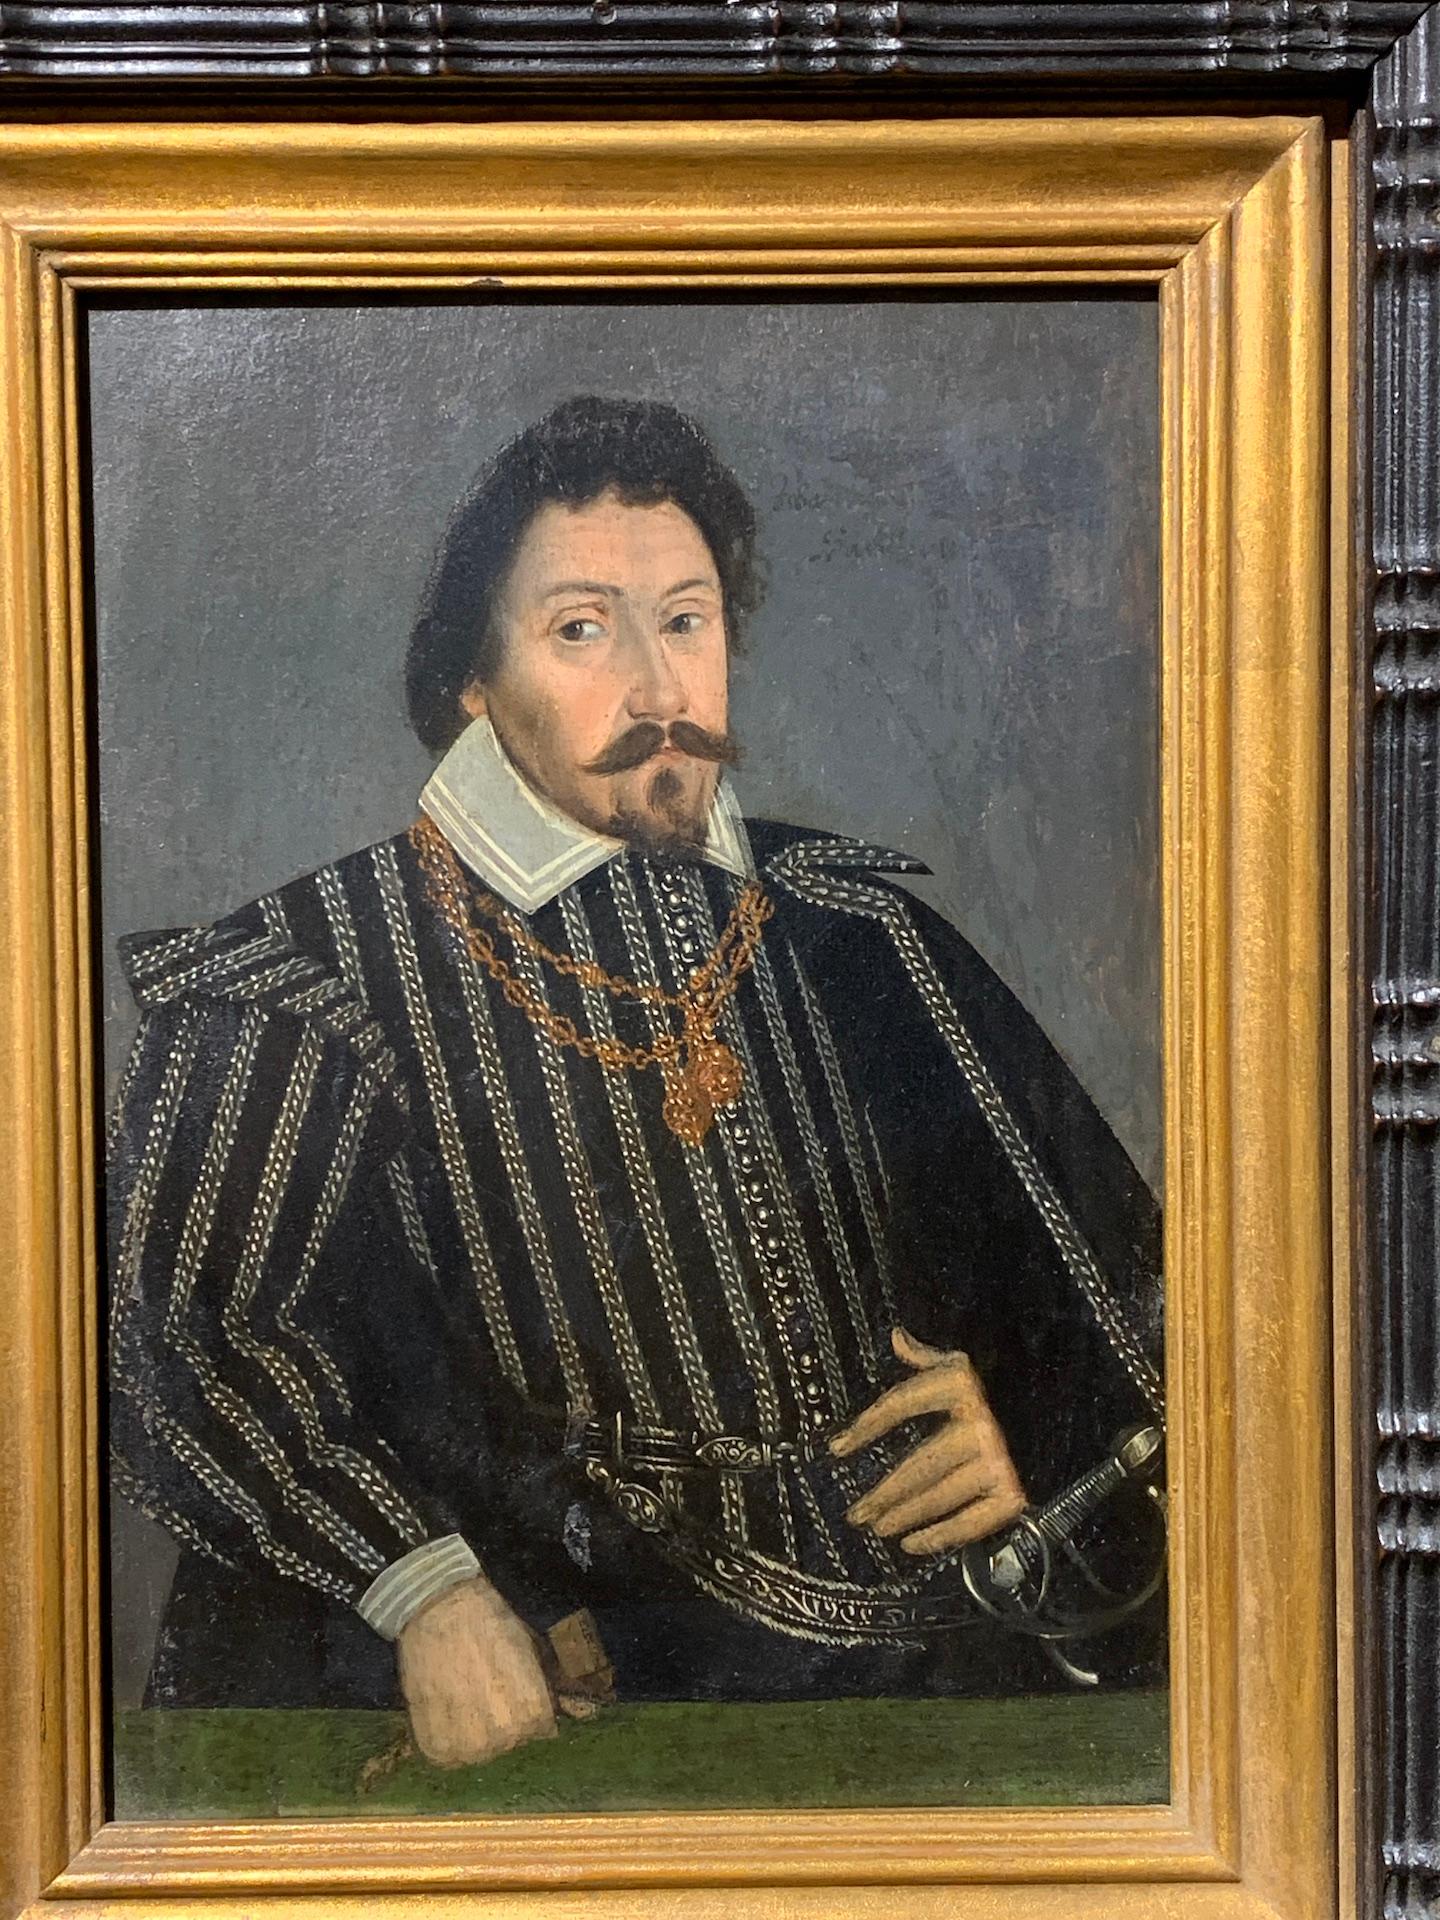 Early 17th century Portrait of a Nobleman, with sword, on a wood panel - Painting by English 17th century